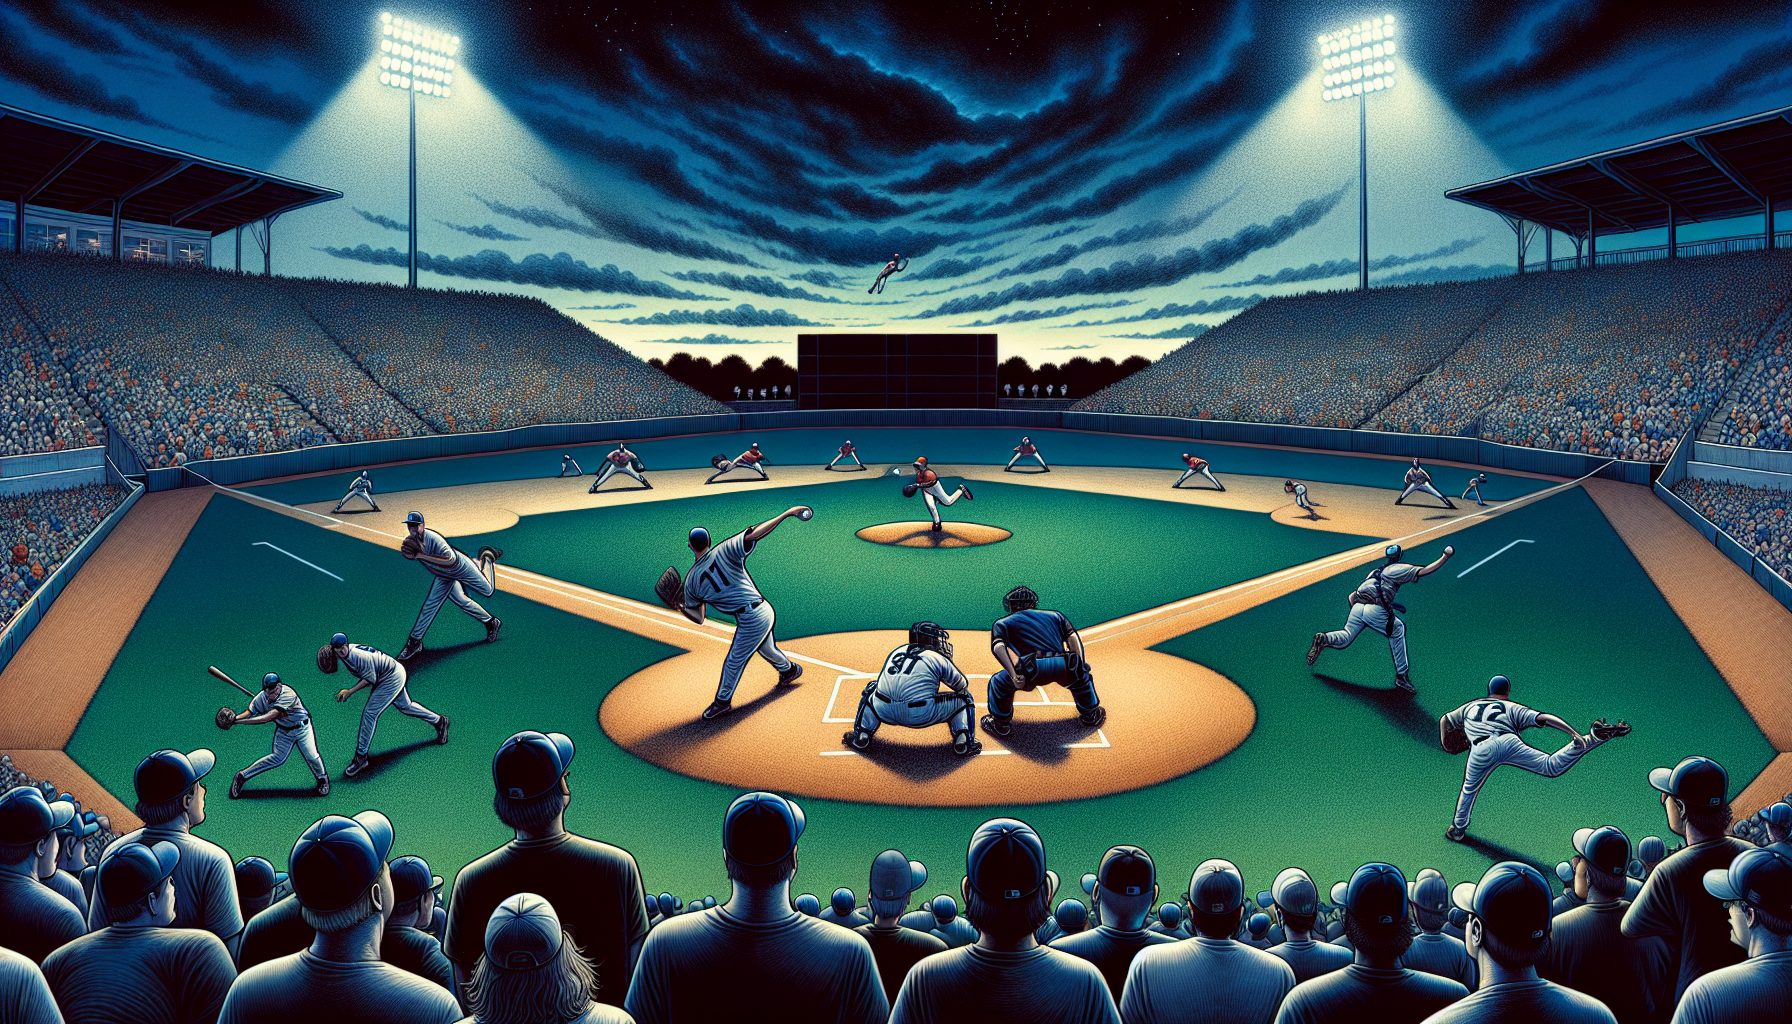 Illustration of a baseball game in extra innings